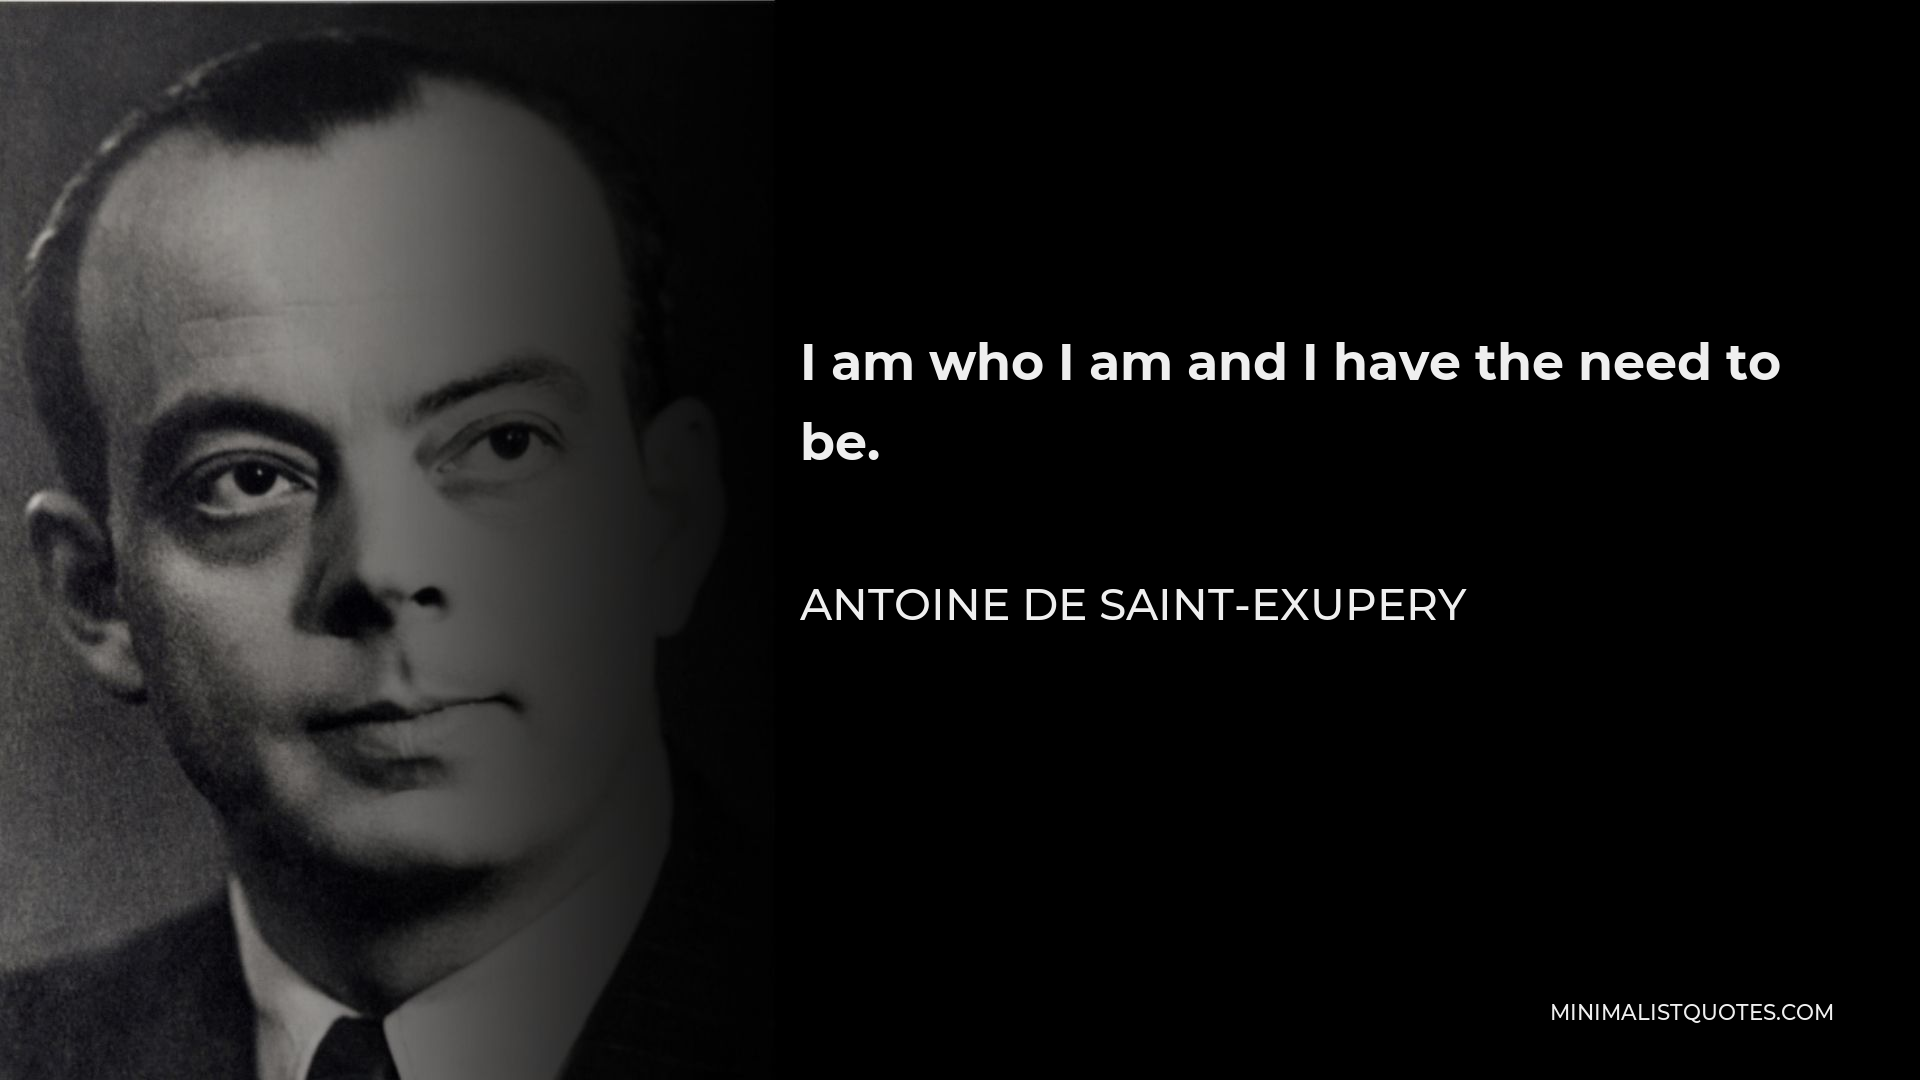 Antoine de Saint-Exupery Quote - I am who I am and I have the need to be.